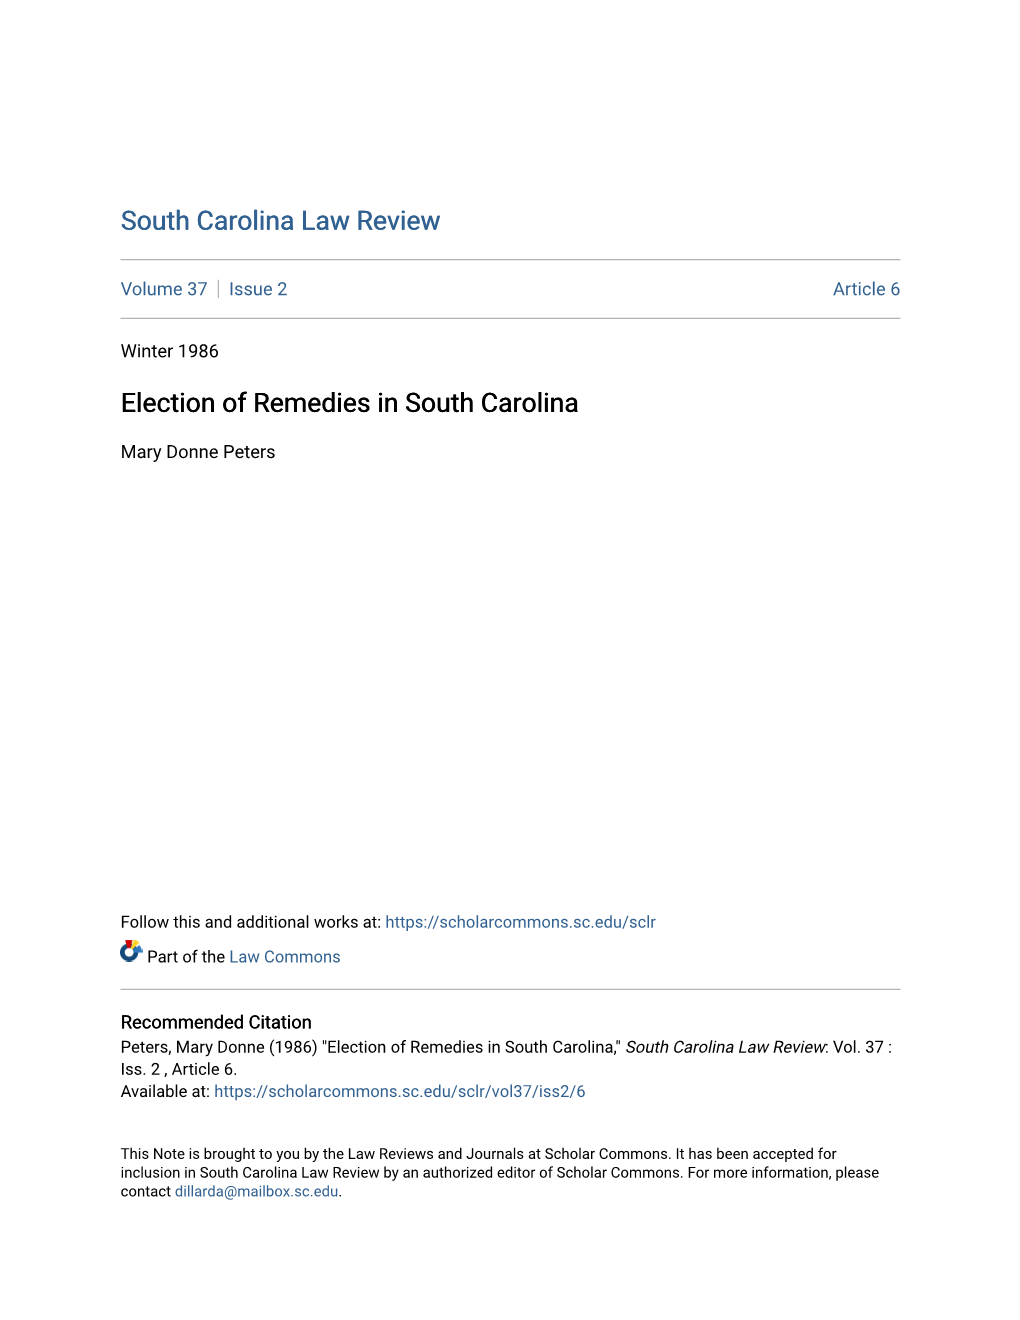 Election of Remedies in South Carolina